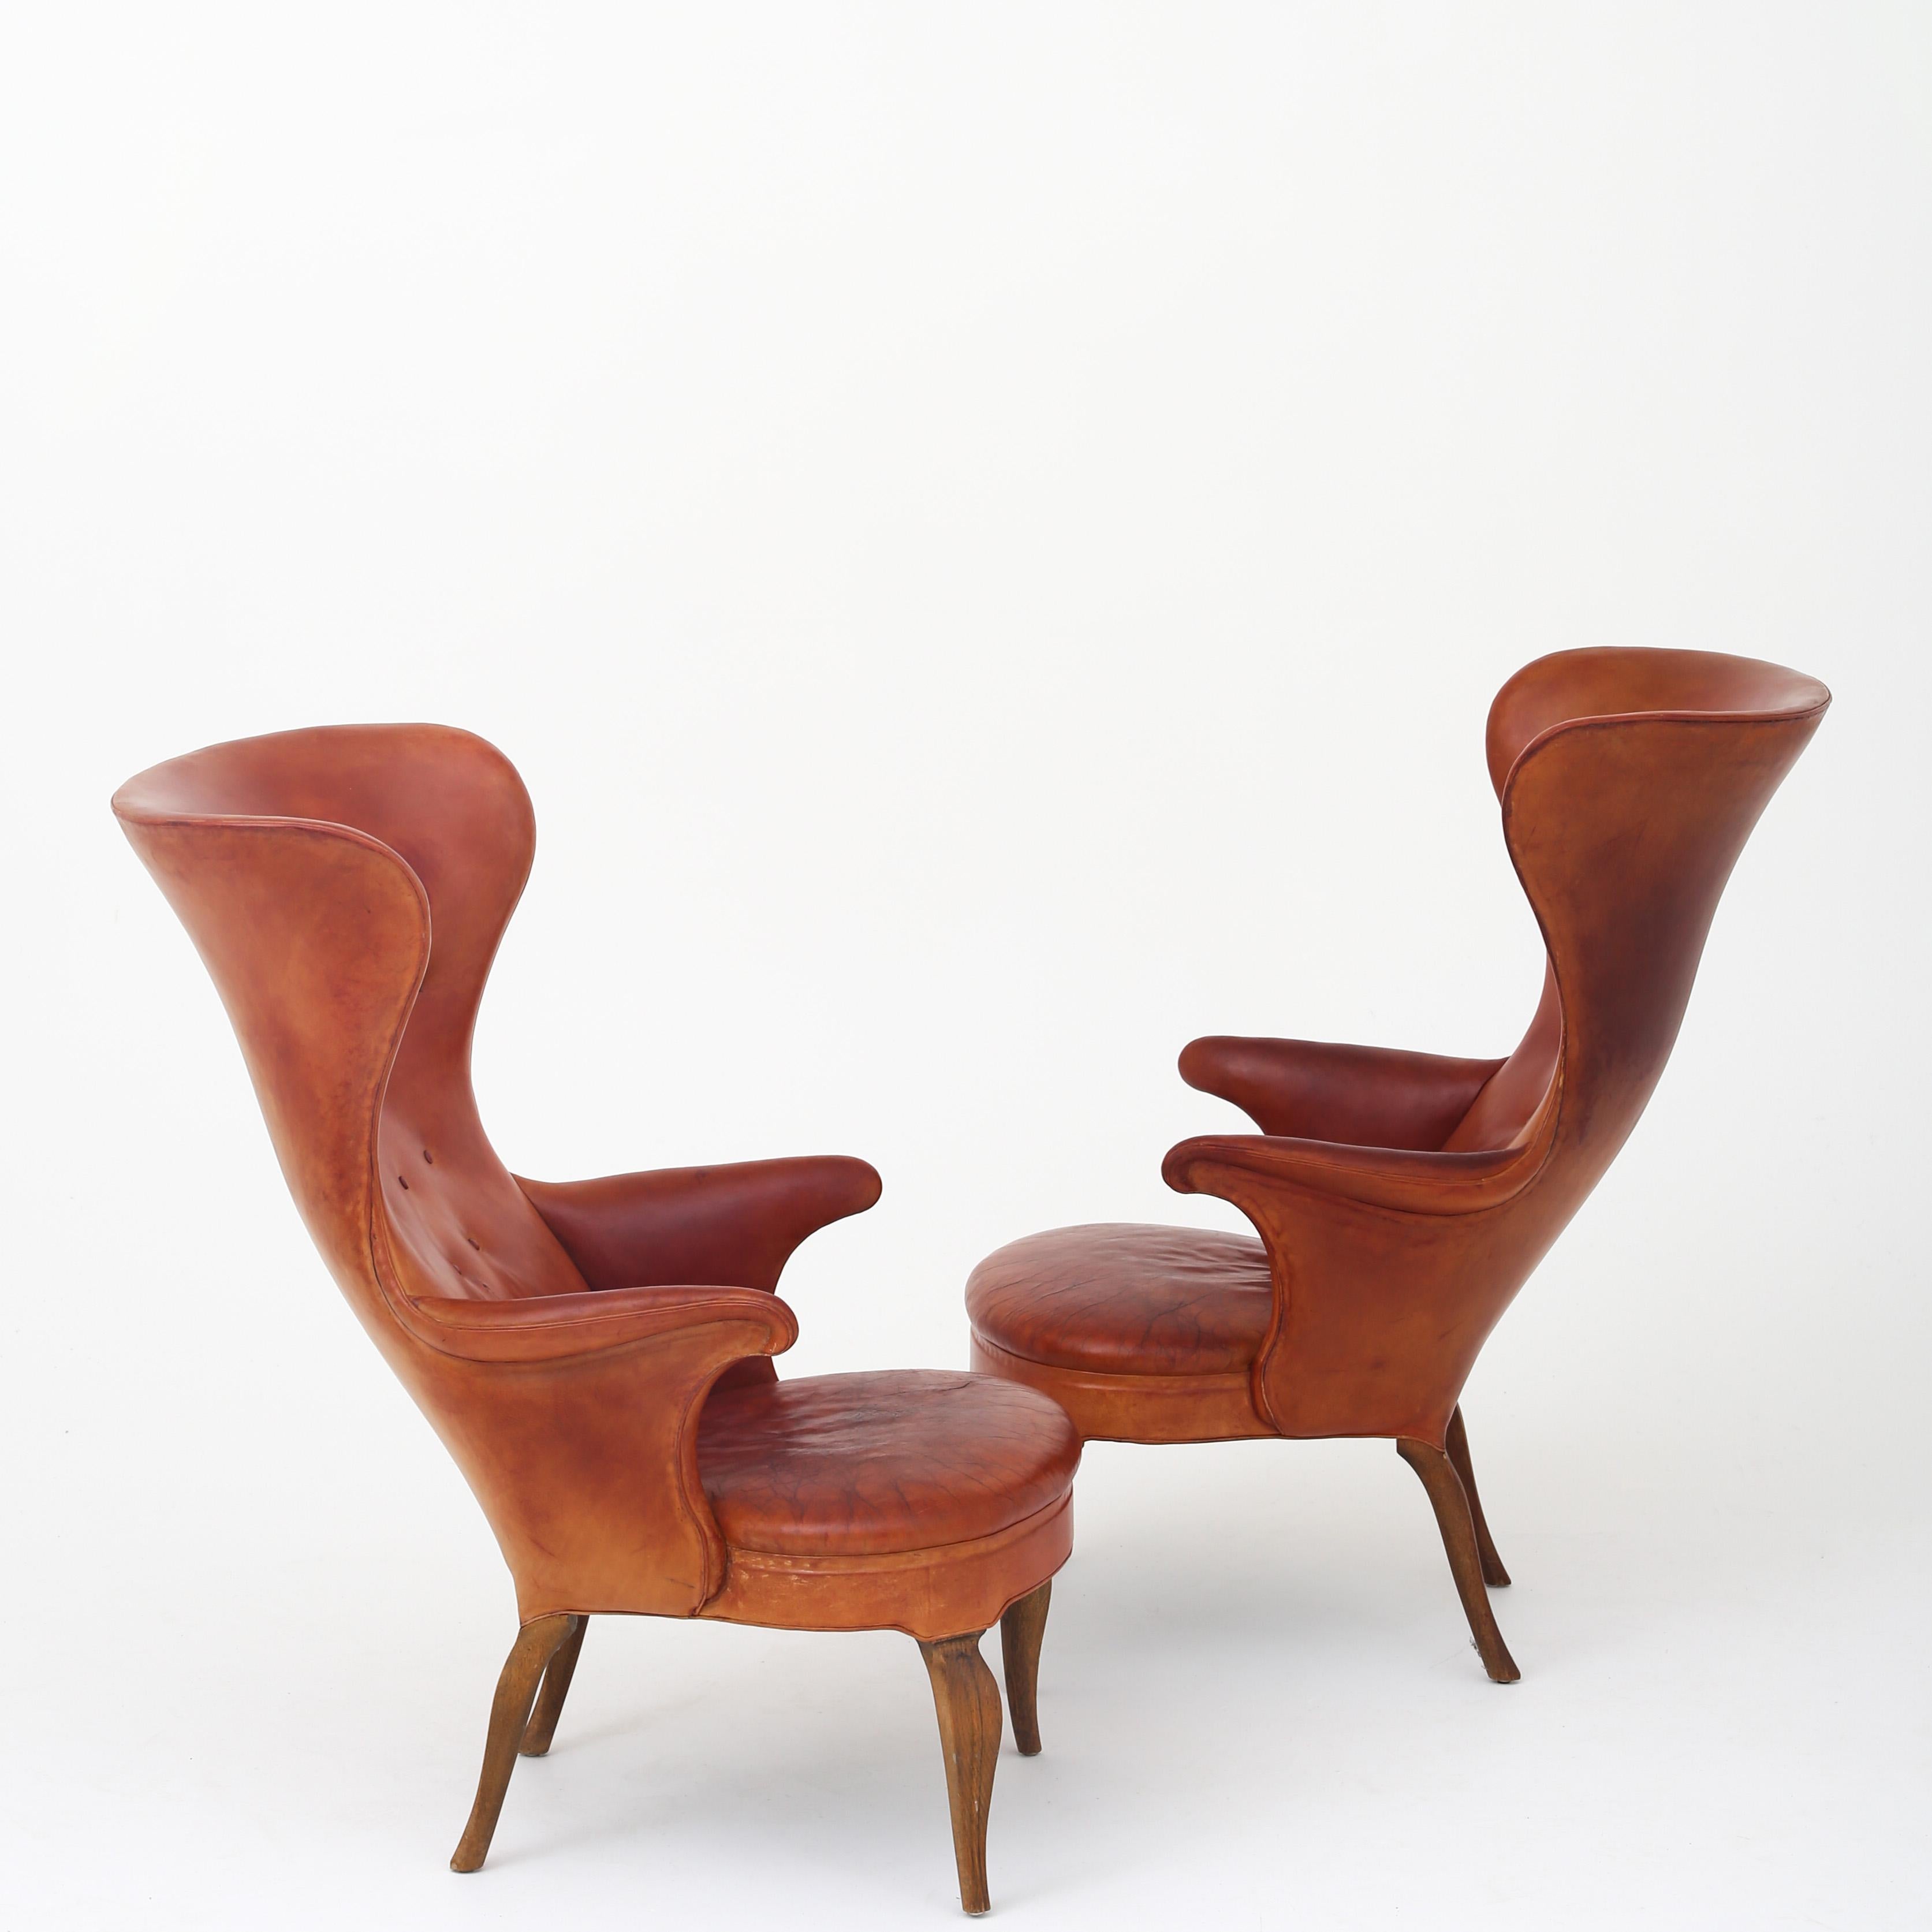 A pair of exceptionally rare 'Wingback' armchairs in original patinated natural leather with solid oak legs. Designed in 1935 and manufactured in the same period. By Frits Henningsen.